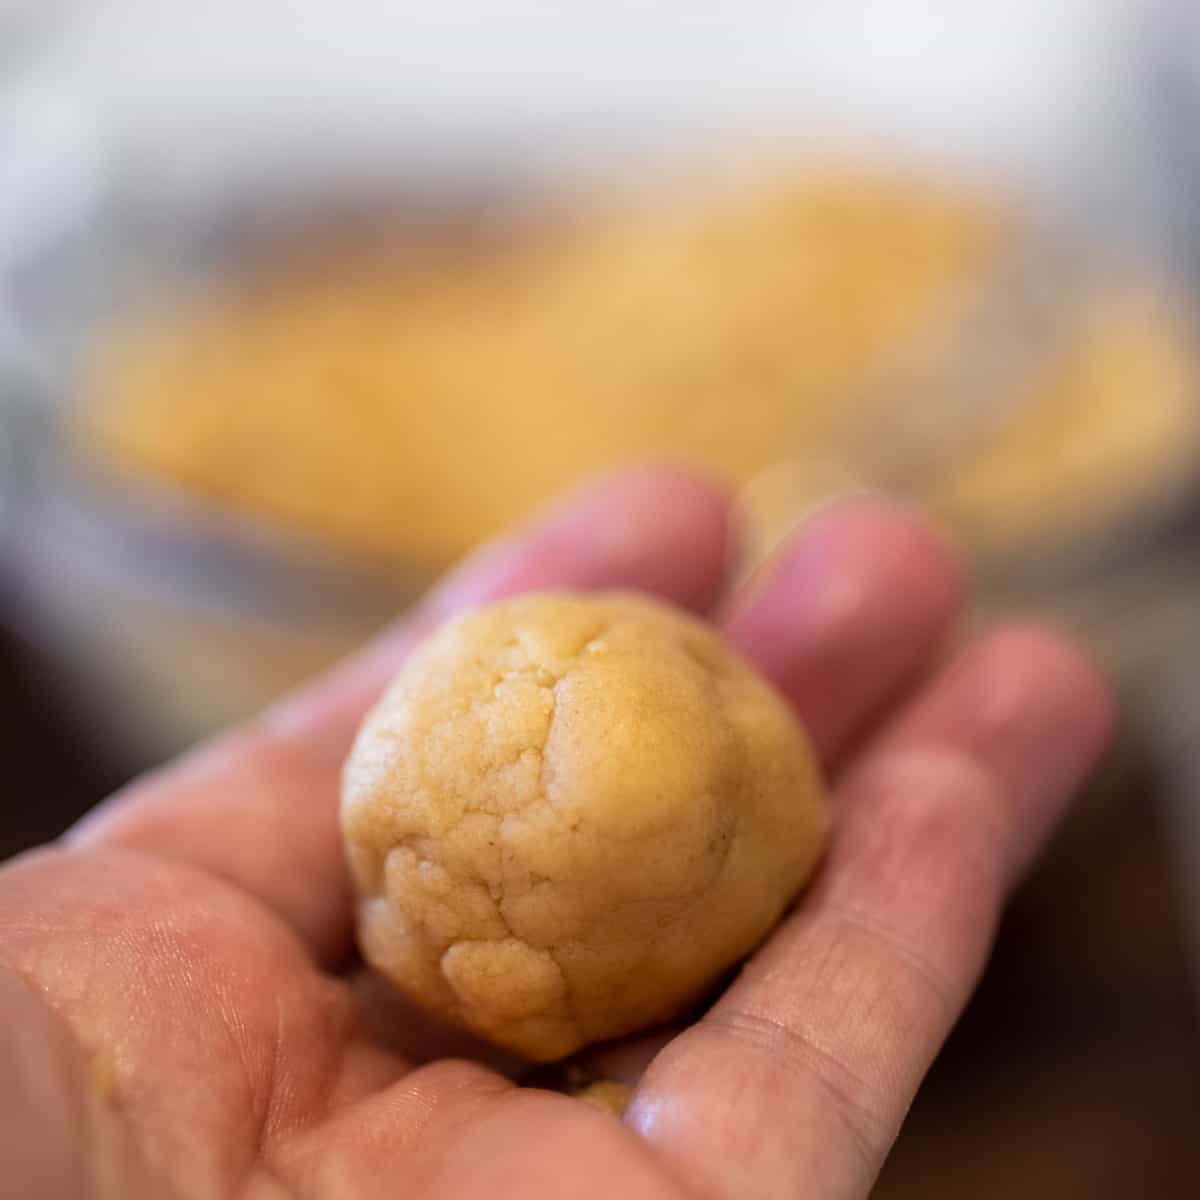 A ball of cookie dough in a hand.